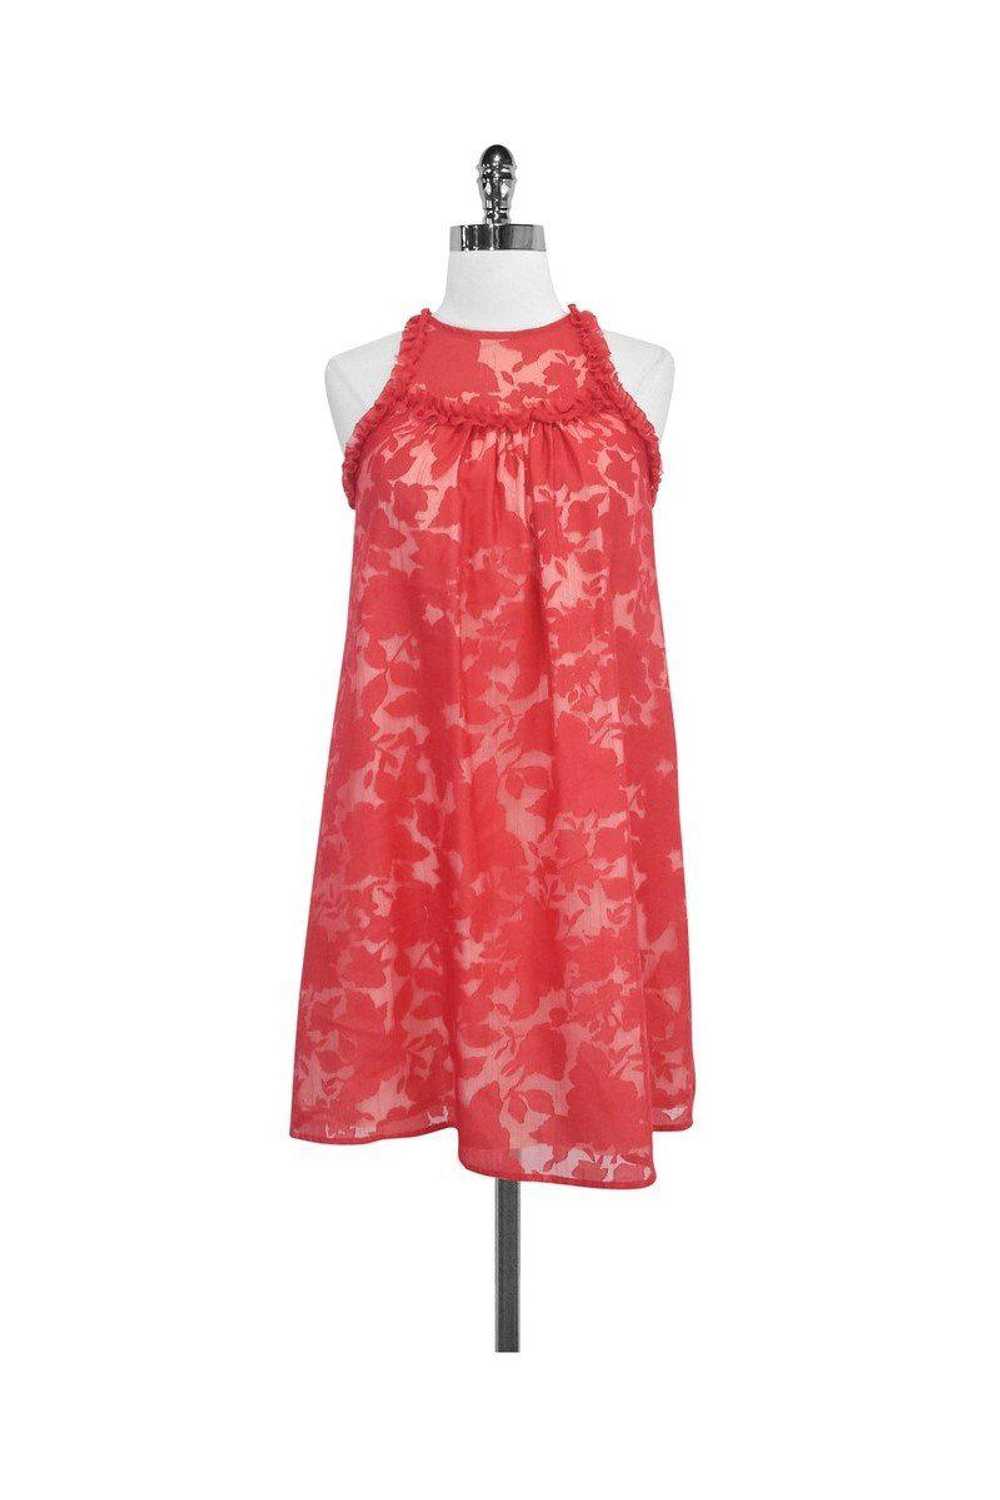 Christopher Deane - Red Floral Print Lace Dress S… - image 1